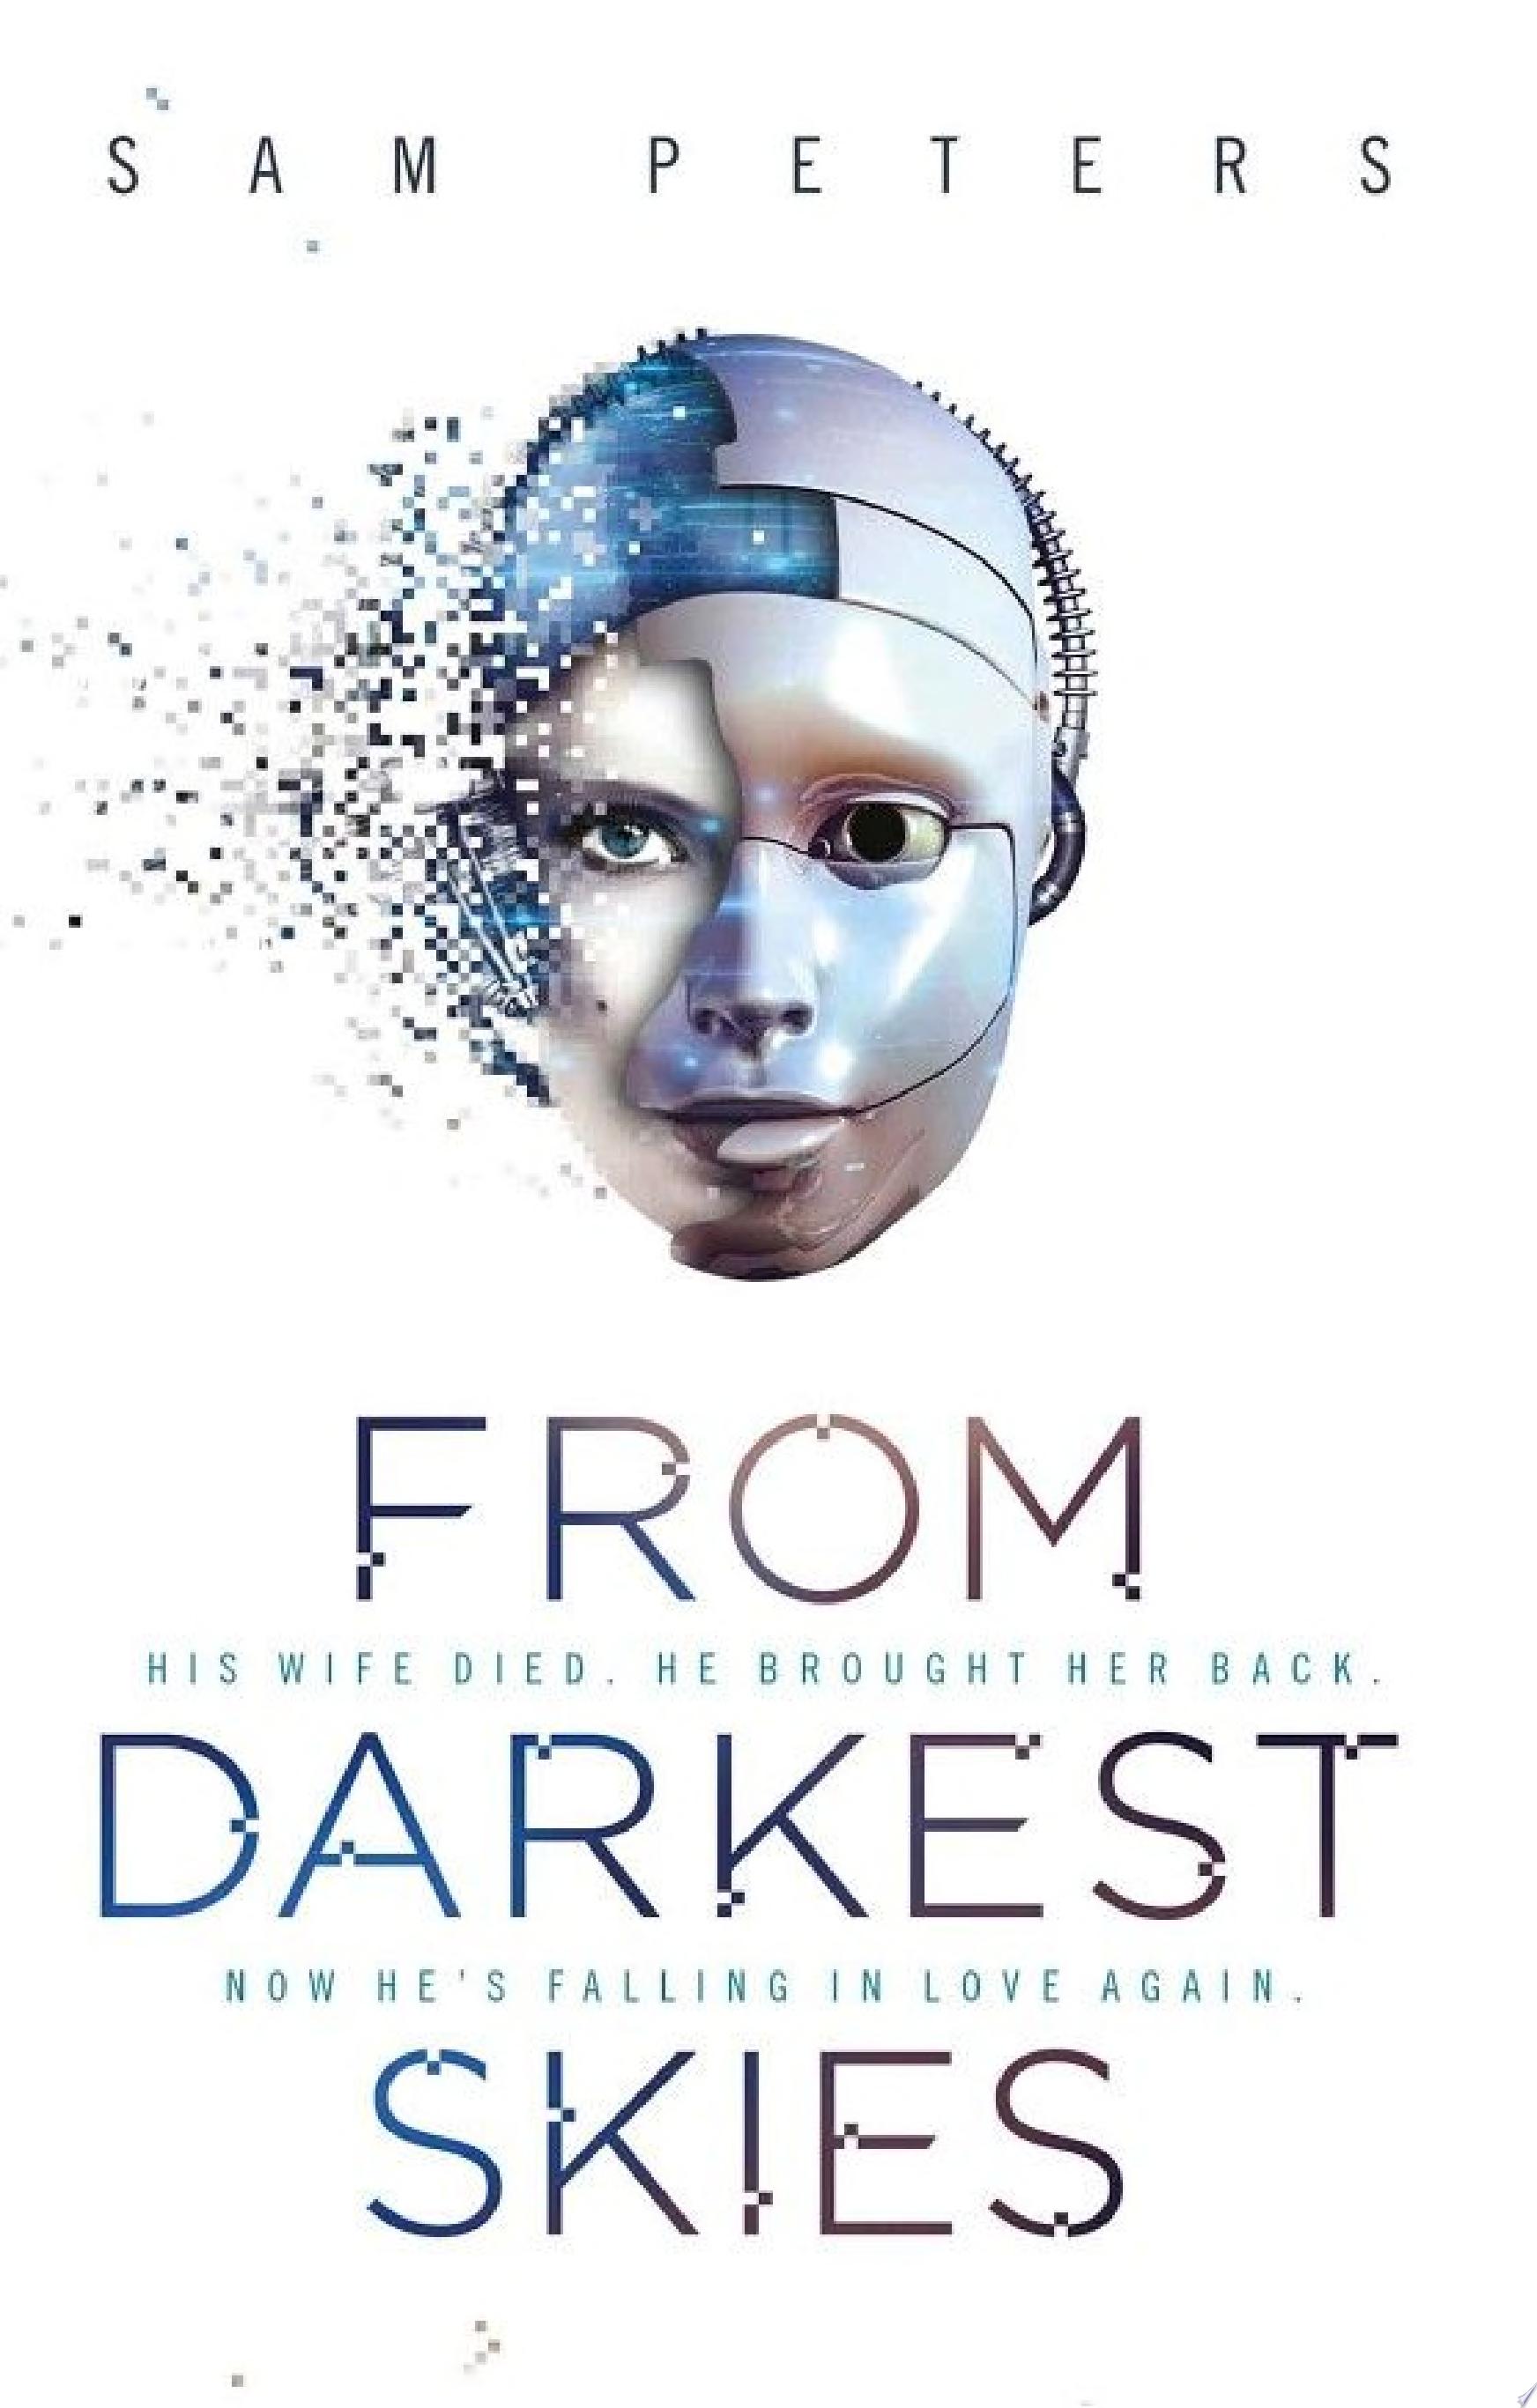 Image for "From Darkest Skies"